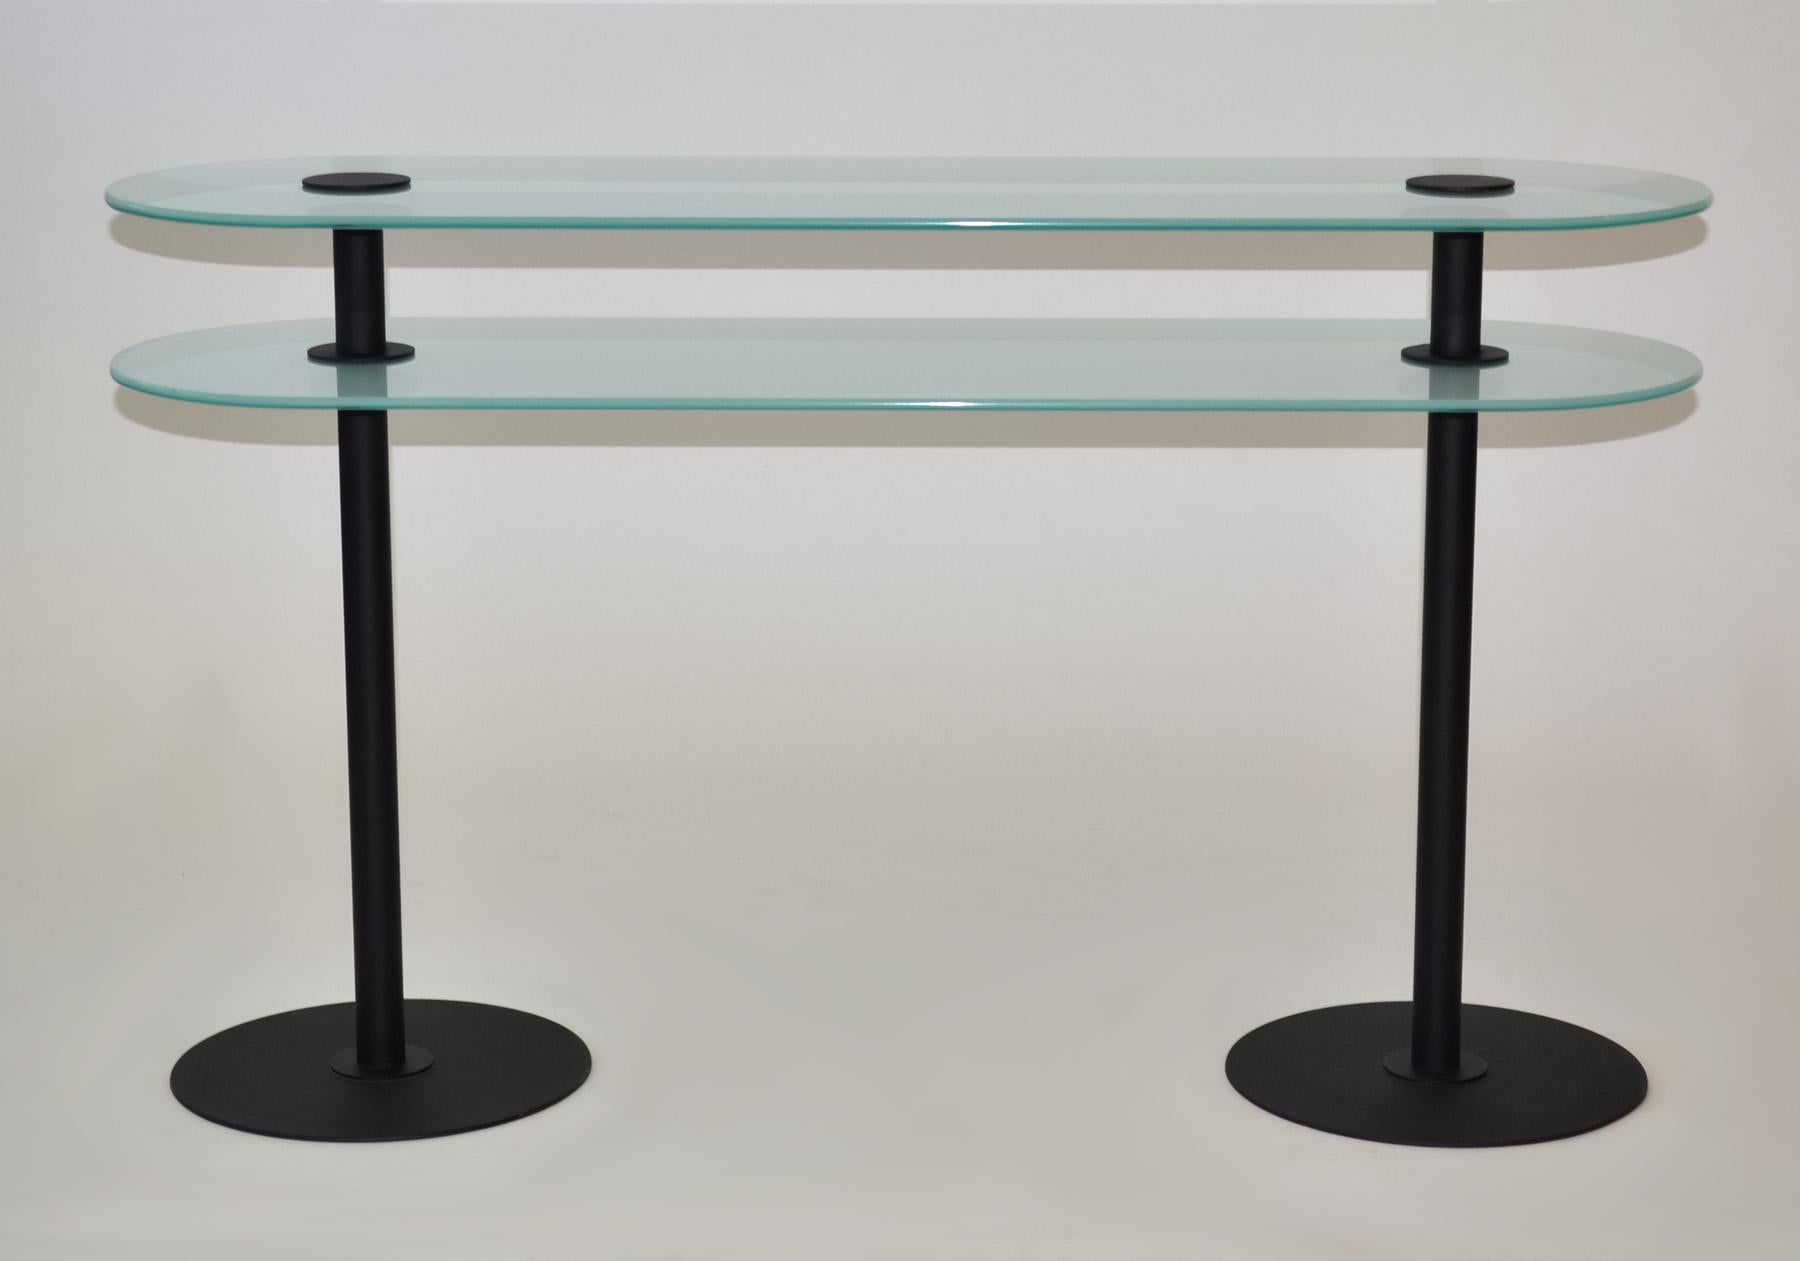 Post Modern Console Table, Italy 1980s
Console, Entry or Hall Table in Sand Blasted Glass with Black Enamel Legs - Post Modern sleek design.
Capsule-shaped top and shelf of thick light green-tinted sandblasted glass. Black enameled legs, caps and